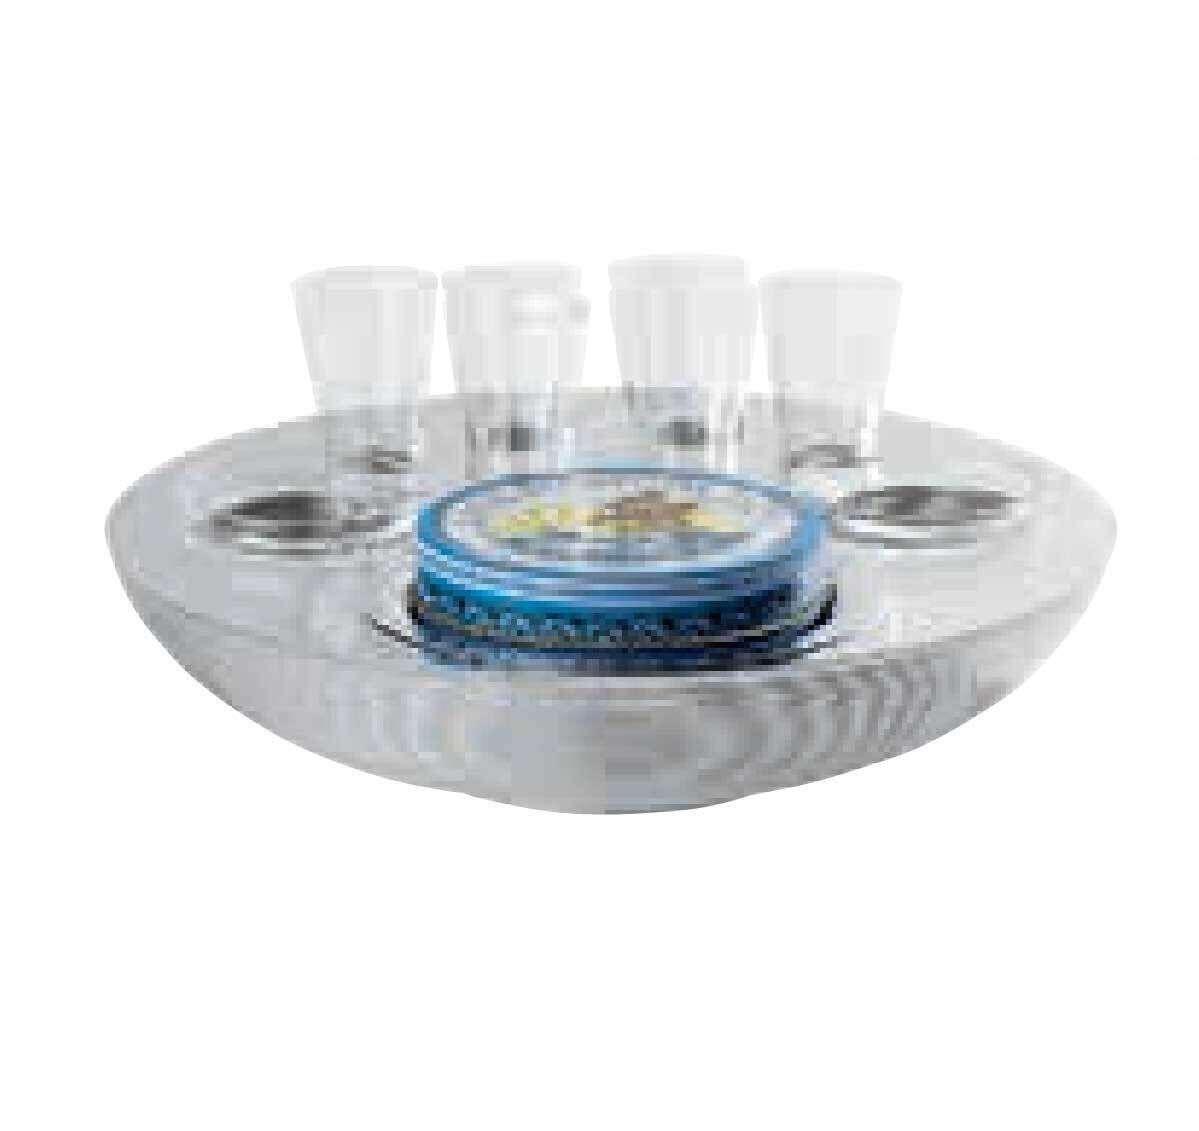 Ercuis Transat Caviar Vodka Set 6 Persons And 2 Condiments 4.5 Inch Silver Plated F545180-06